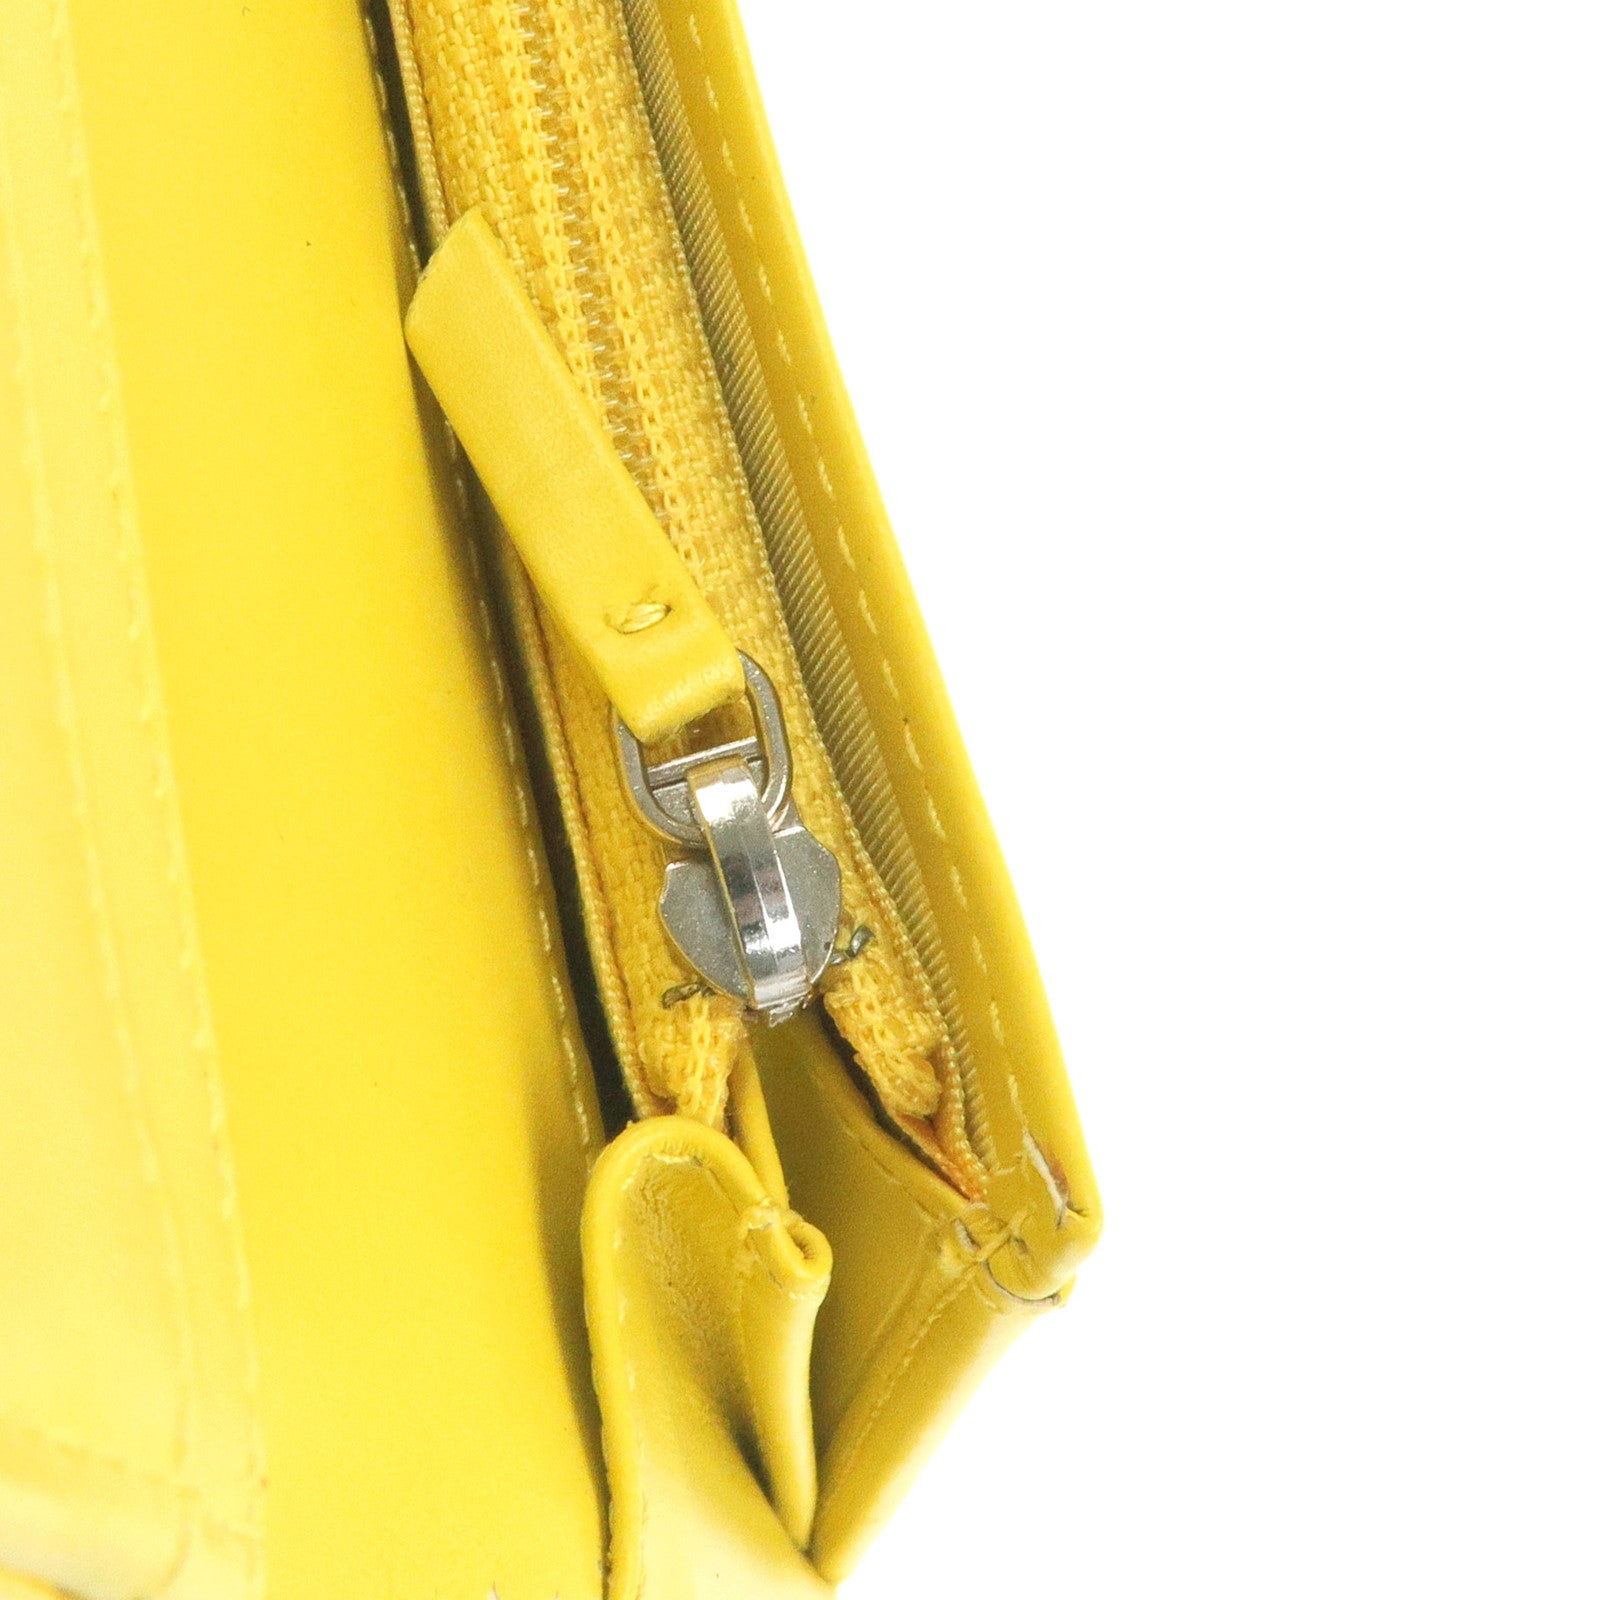 Chanel Mustard Patent Leather Chain Strap Quilted Flap Closure Turn Lock Bag